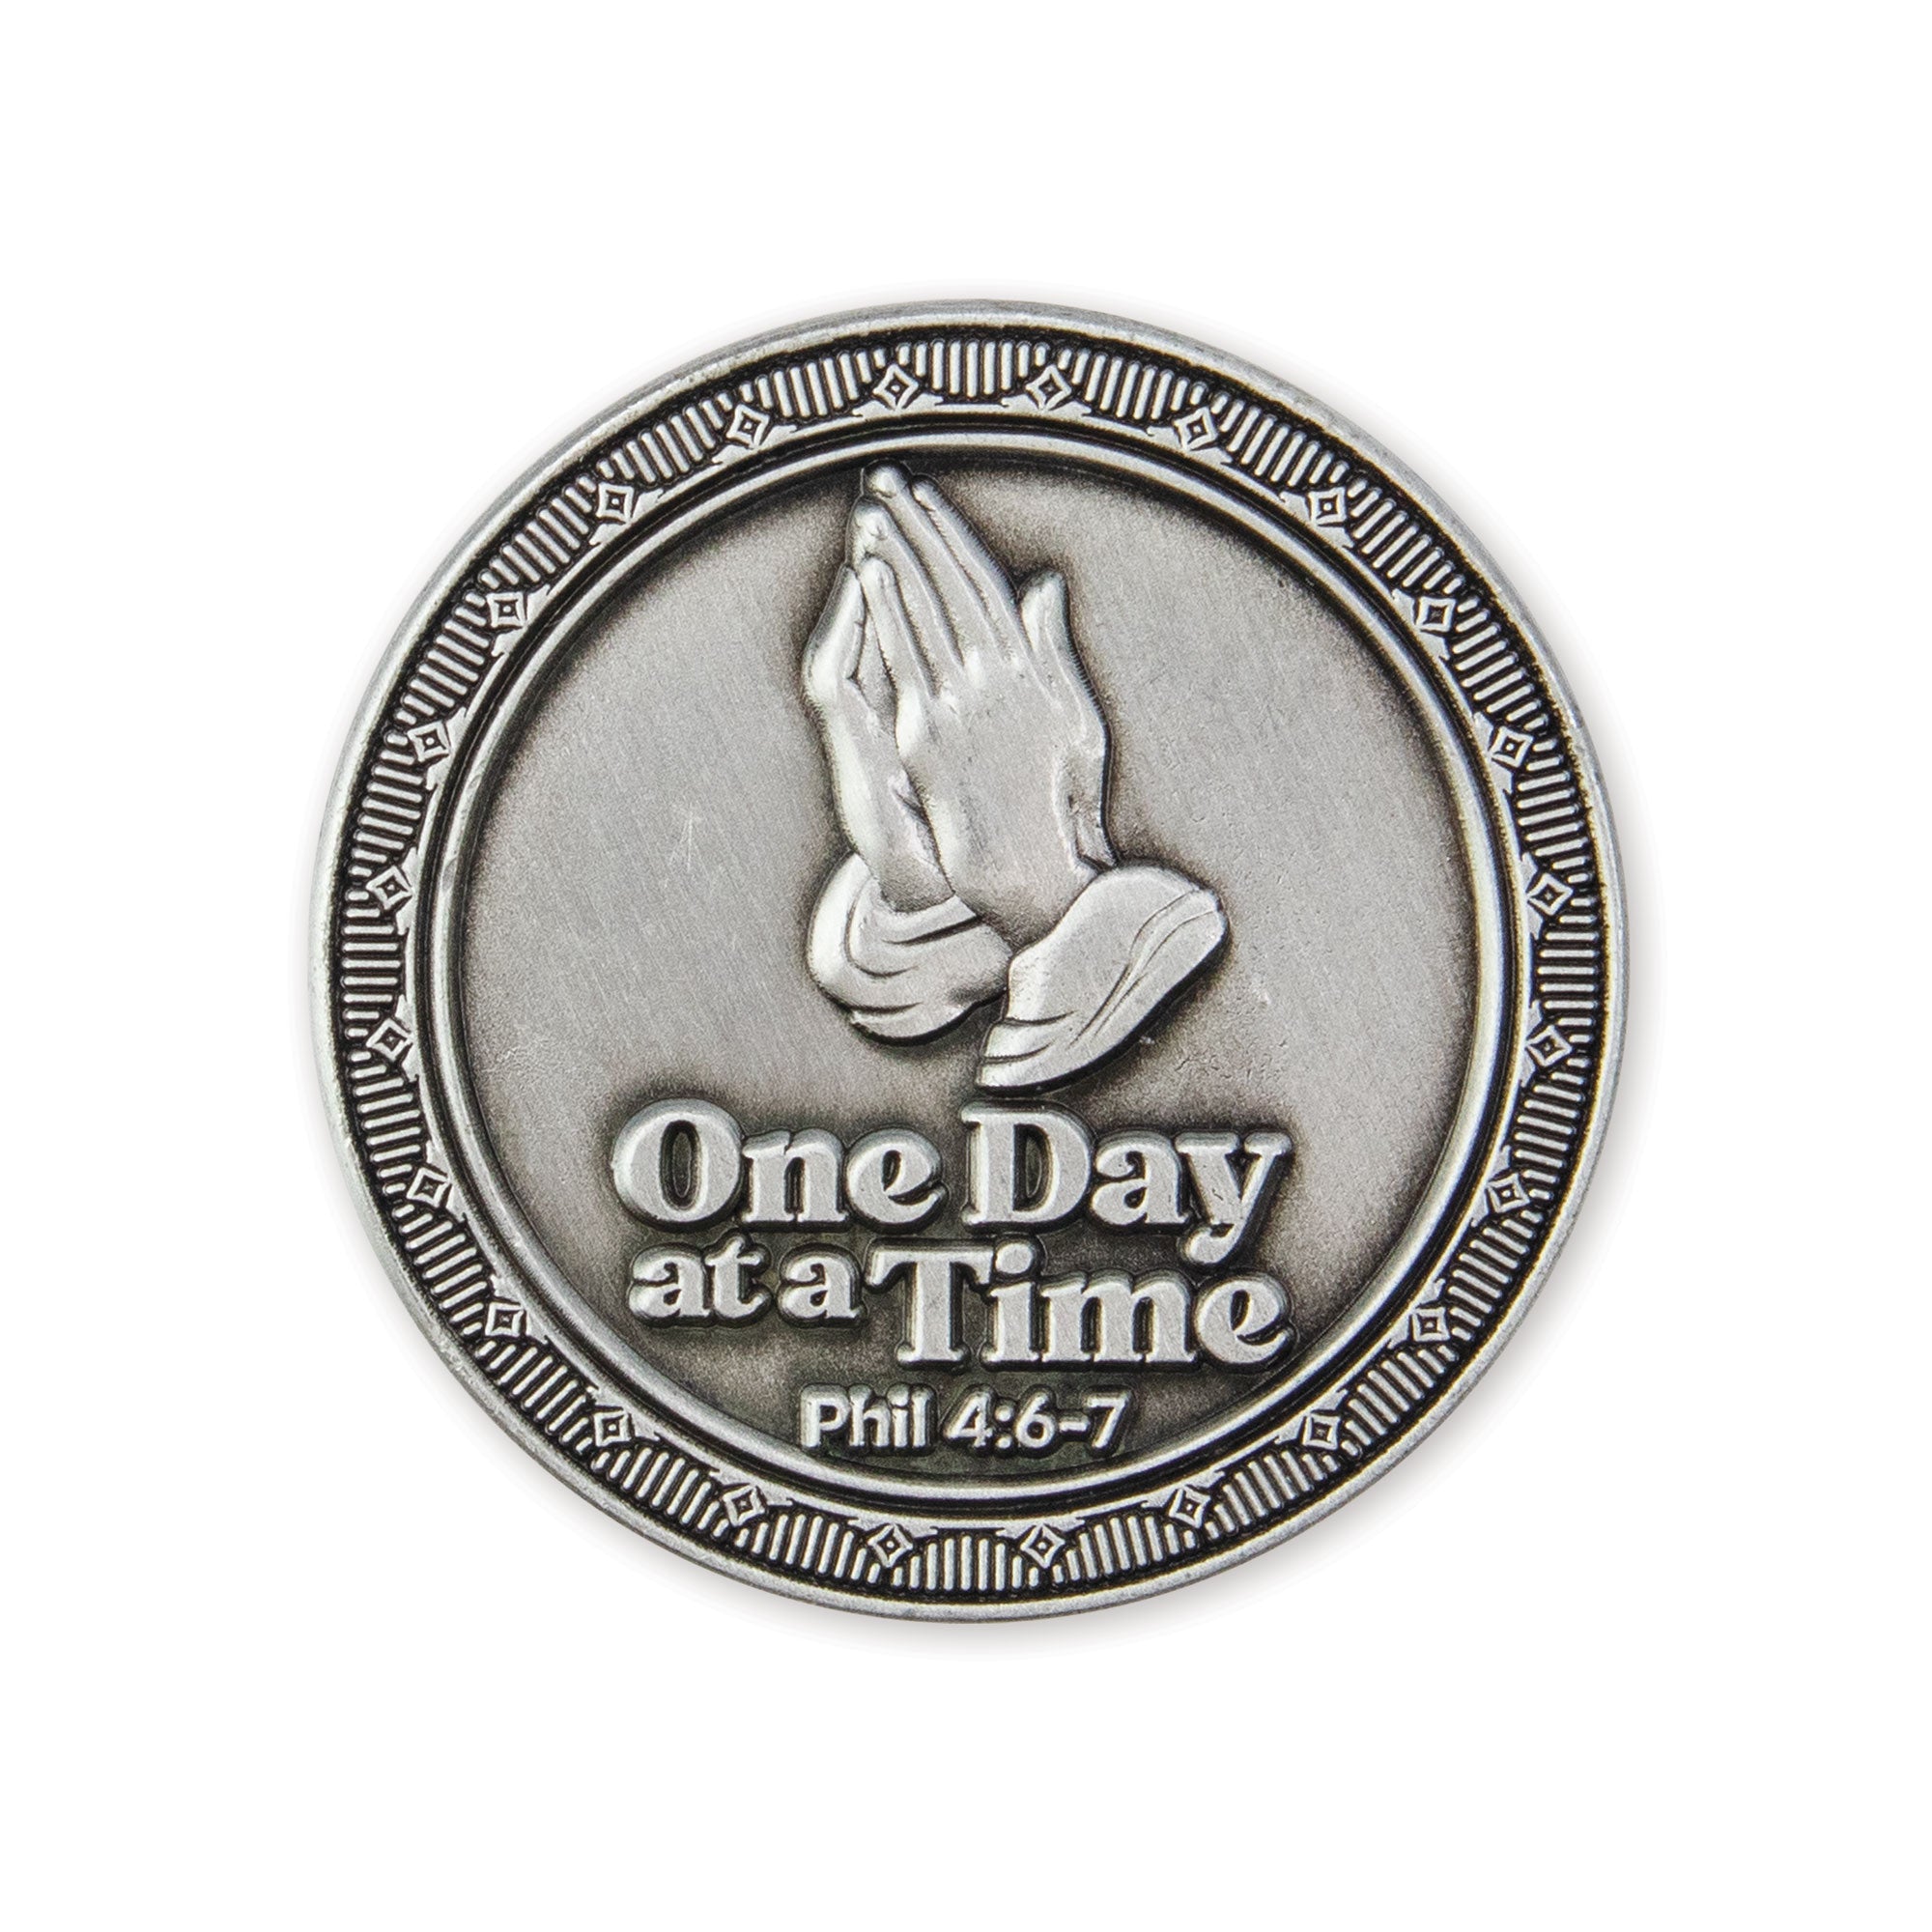 Serenity Prayer & One Day at a Time Love Expression Coin